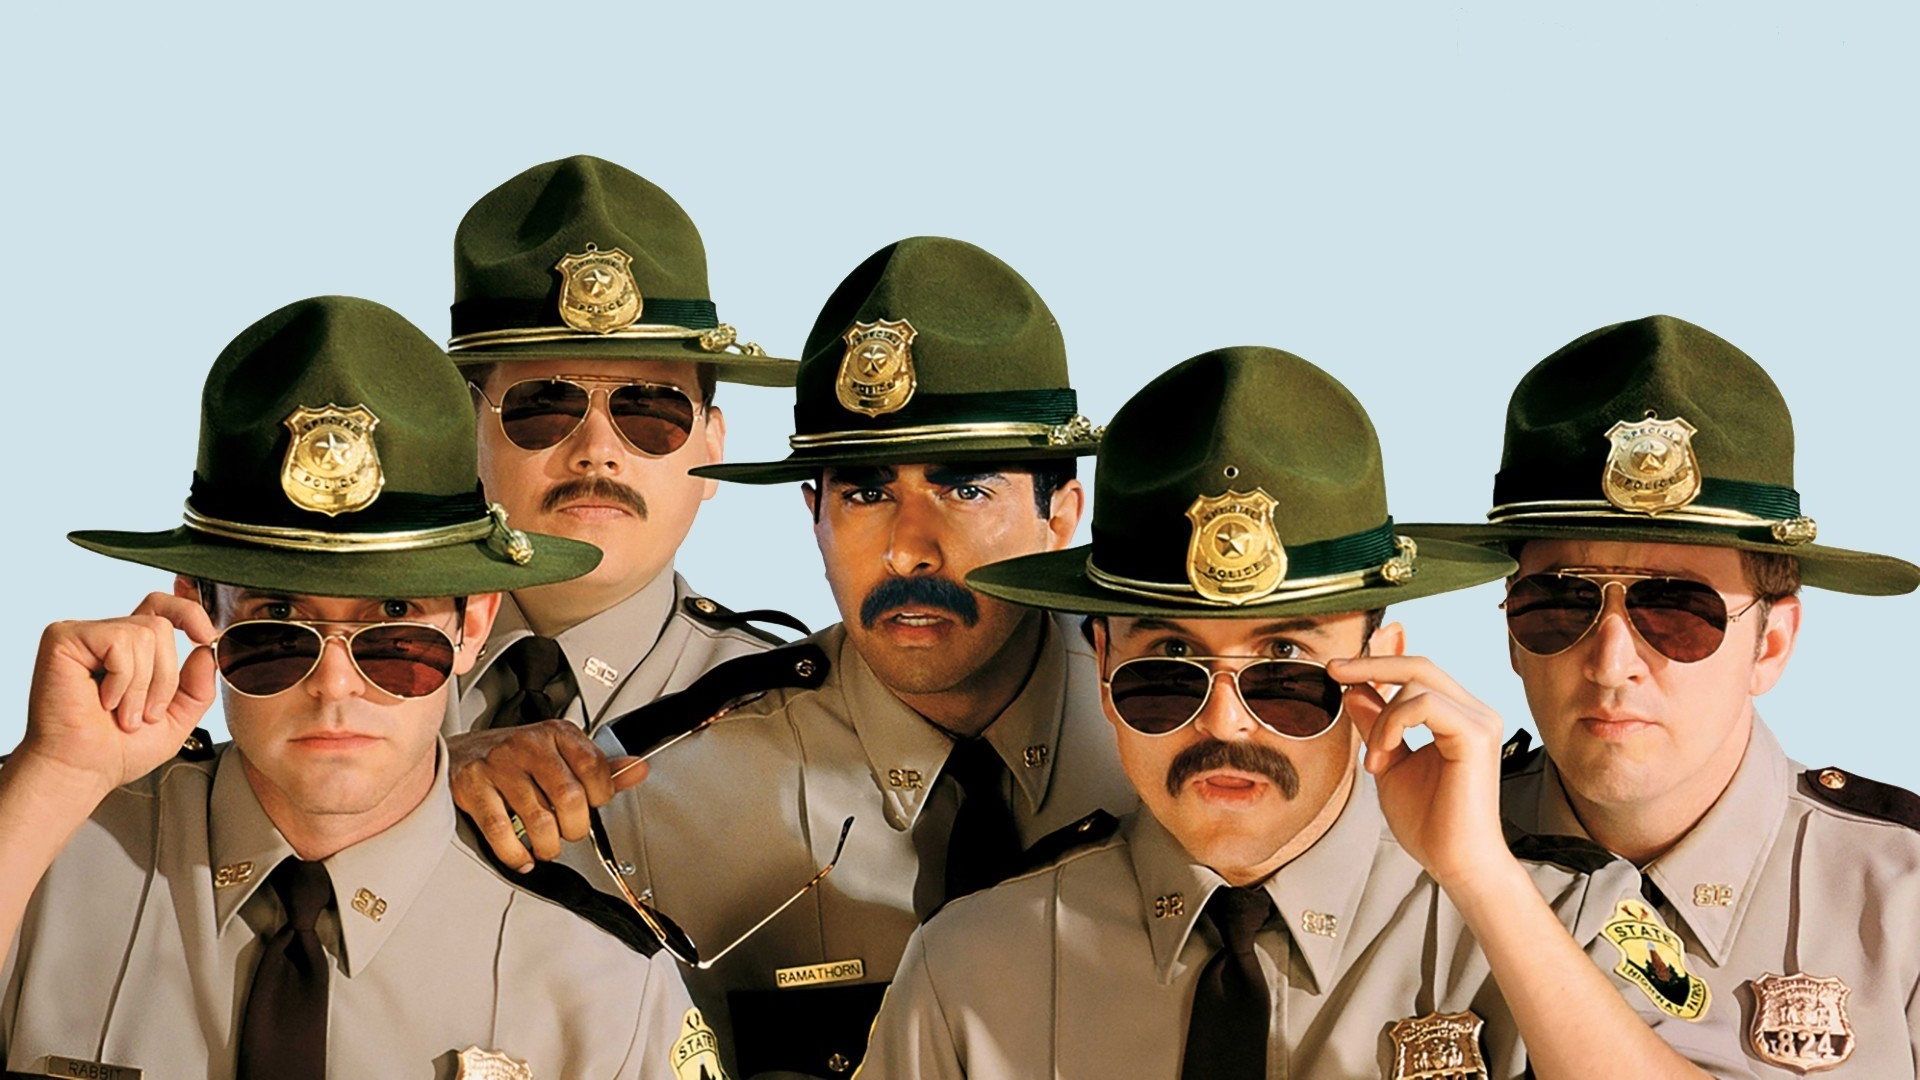 Super Troopers background